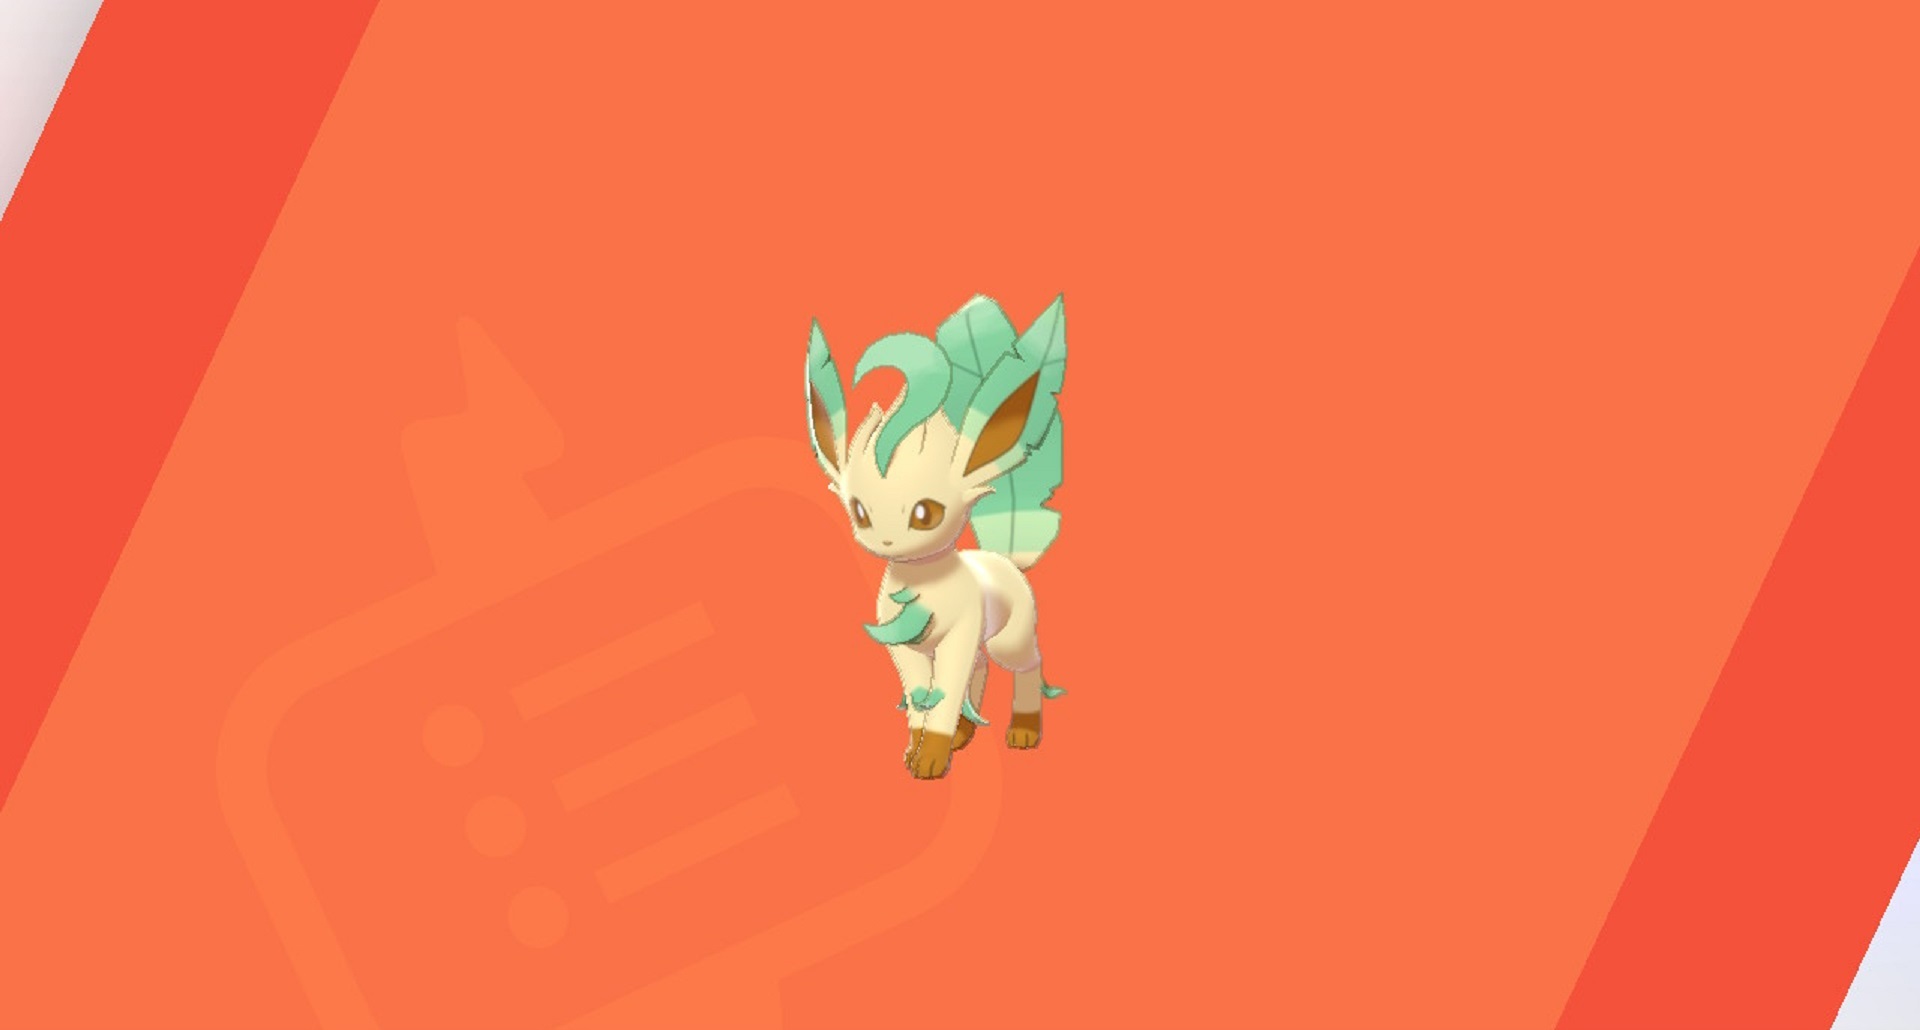 Pokémon Eevee evolutions: Leafeon against a red background.